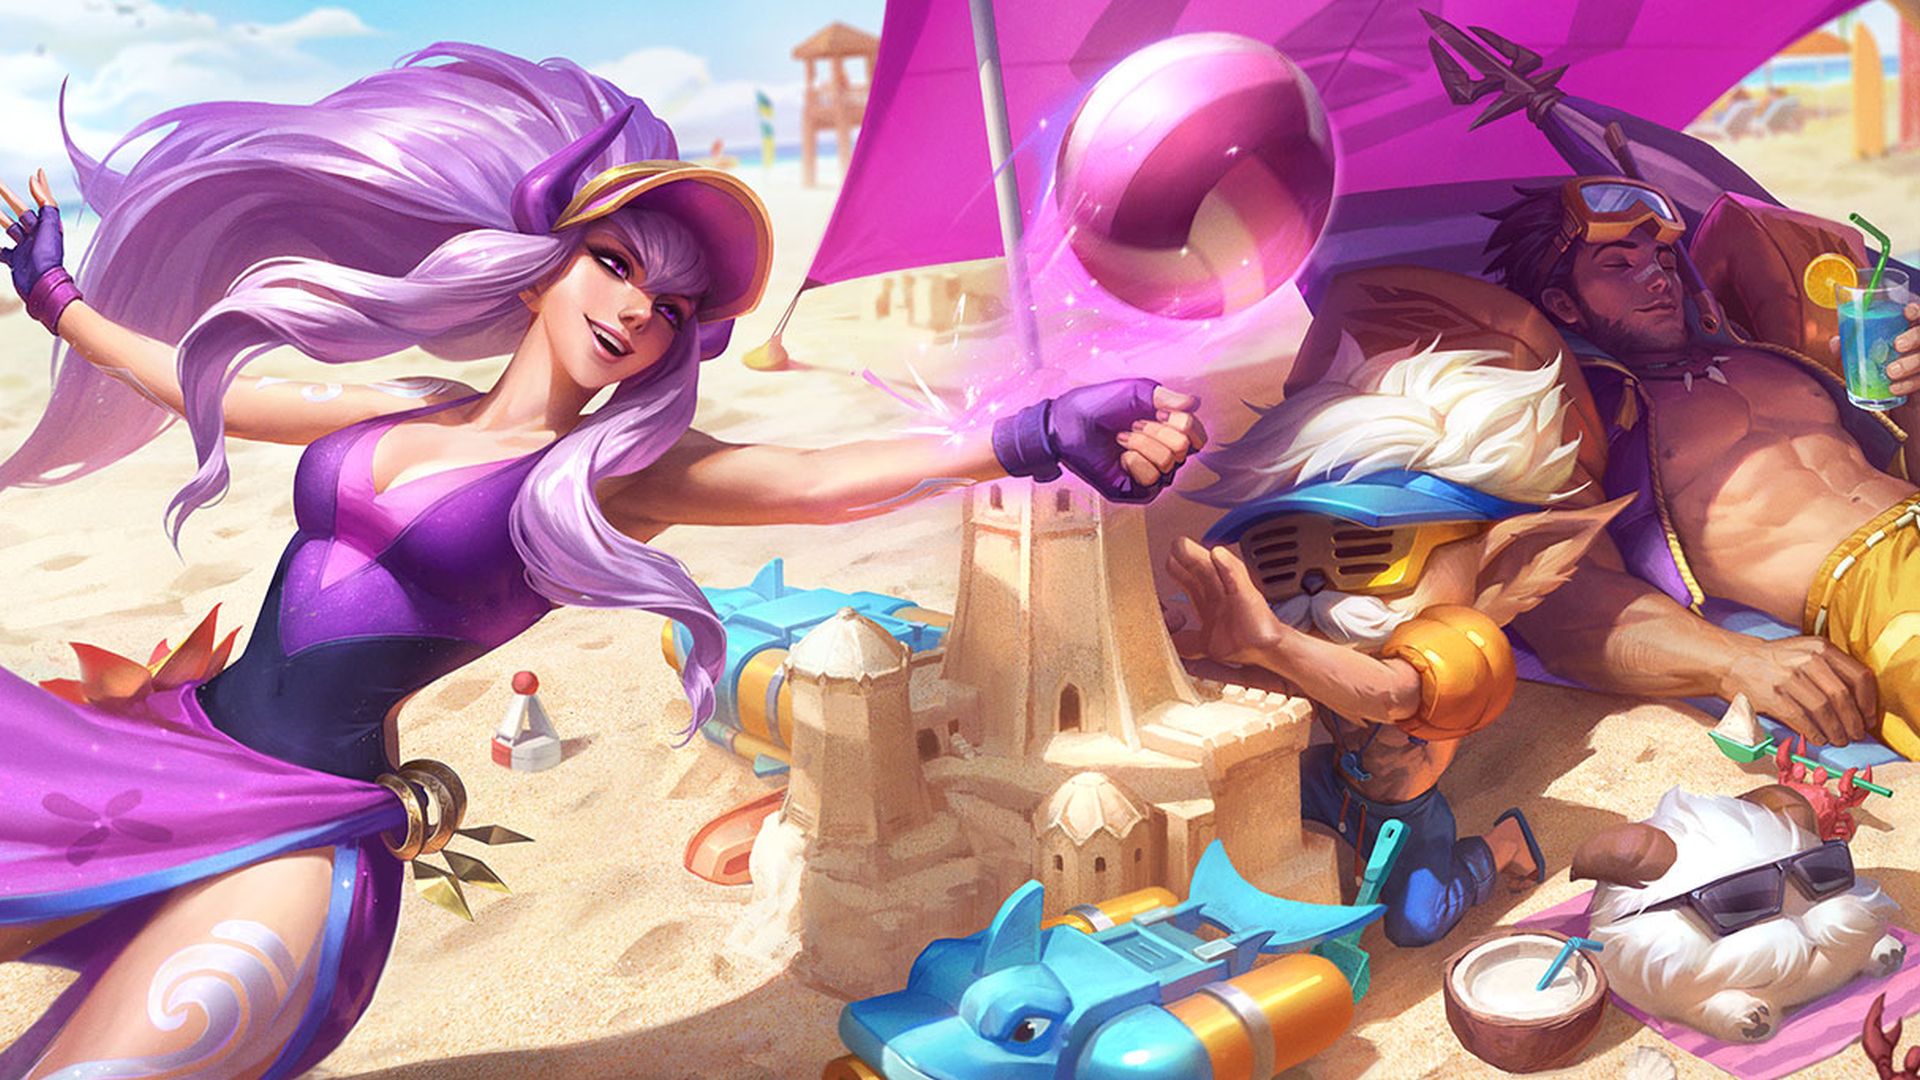 League of Legends Briar nerfs are coming as newcomer finds her feet